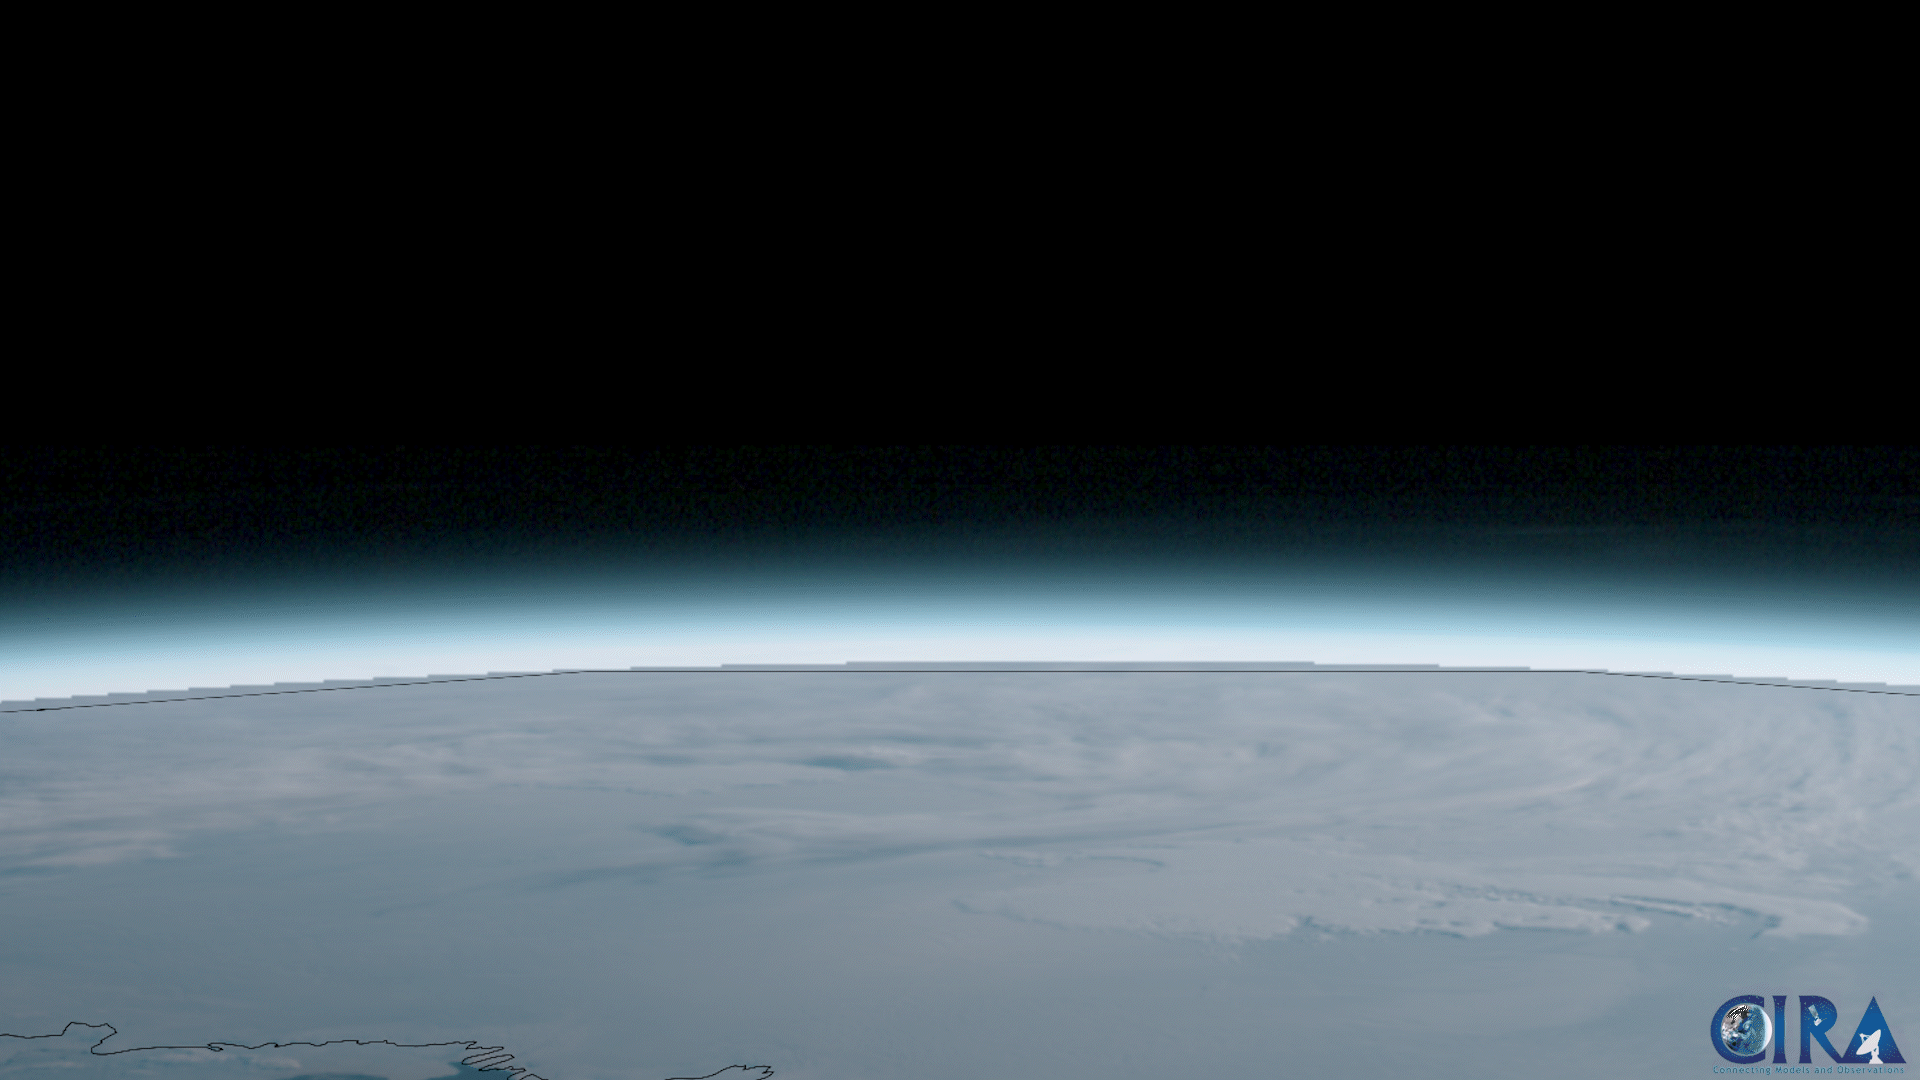 Animation of clouds over antarctica from space.